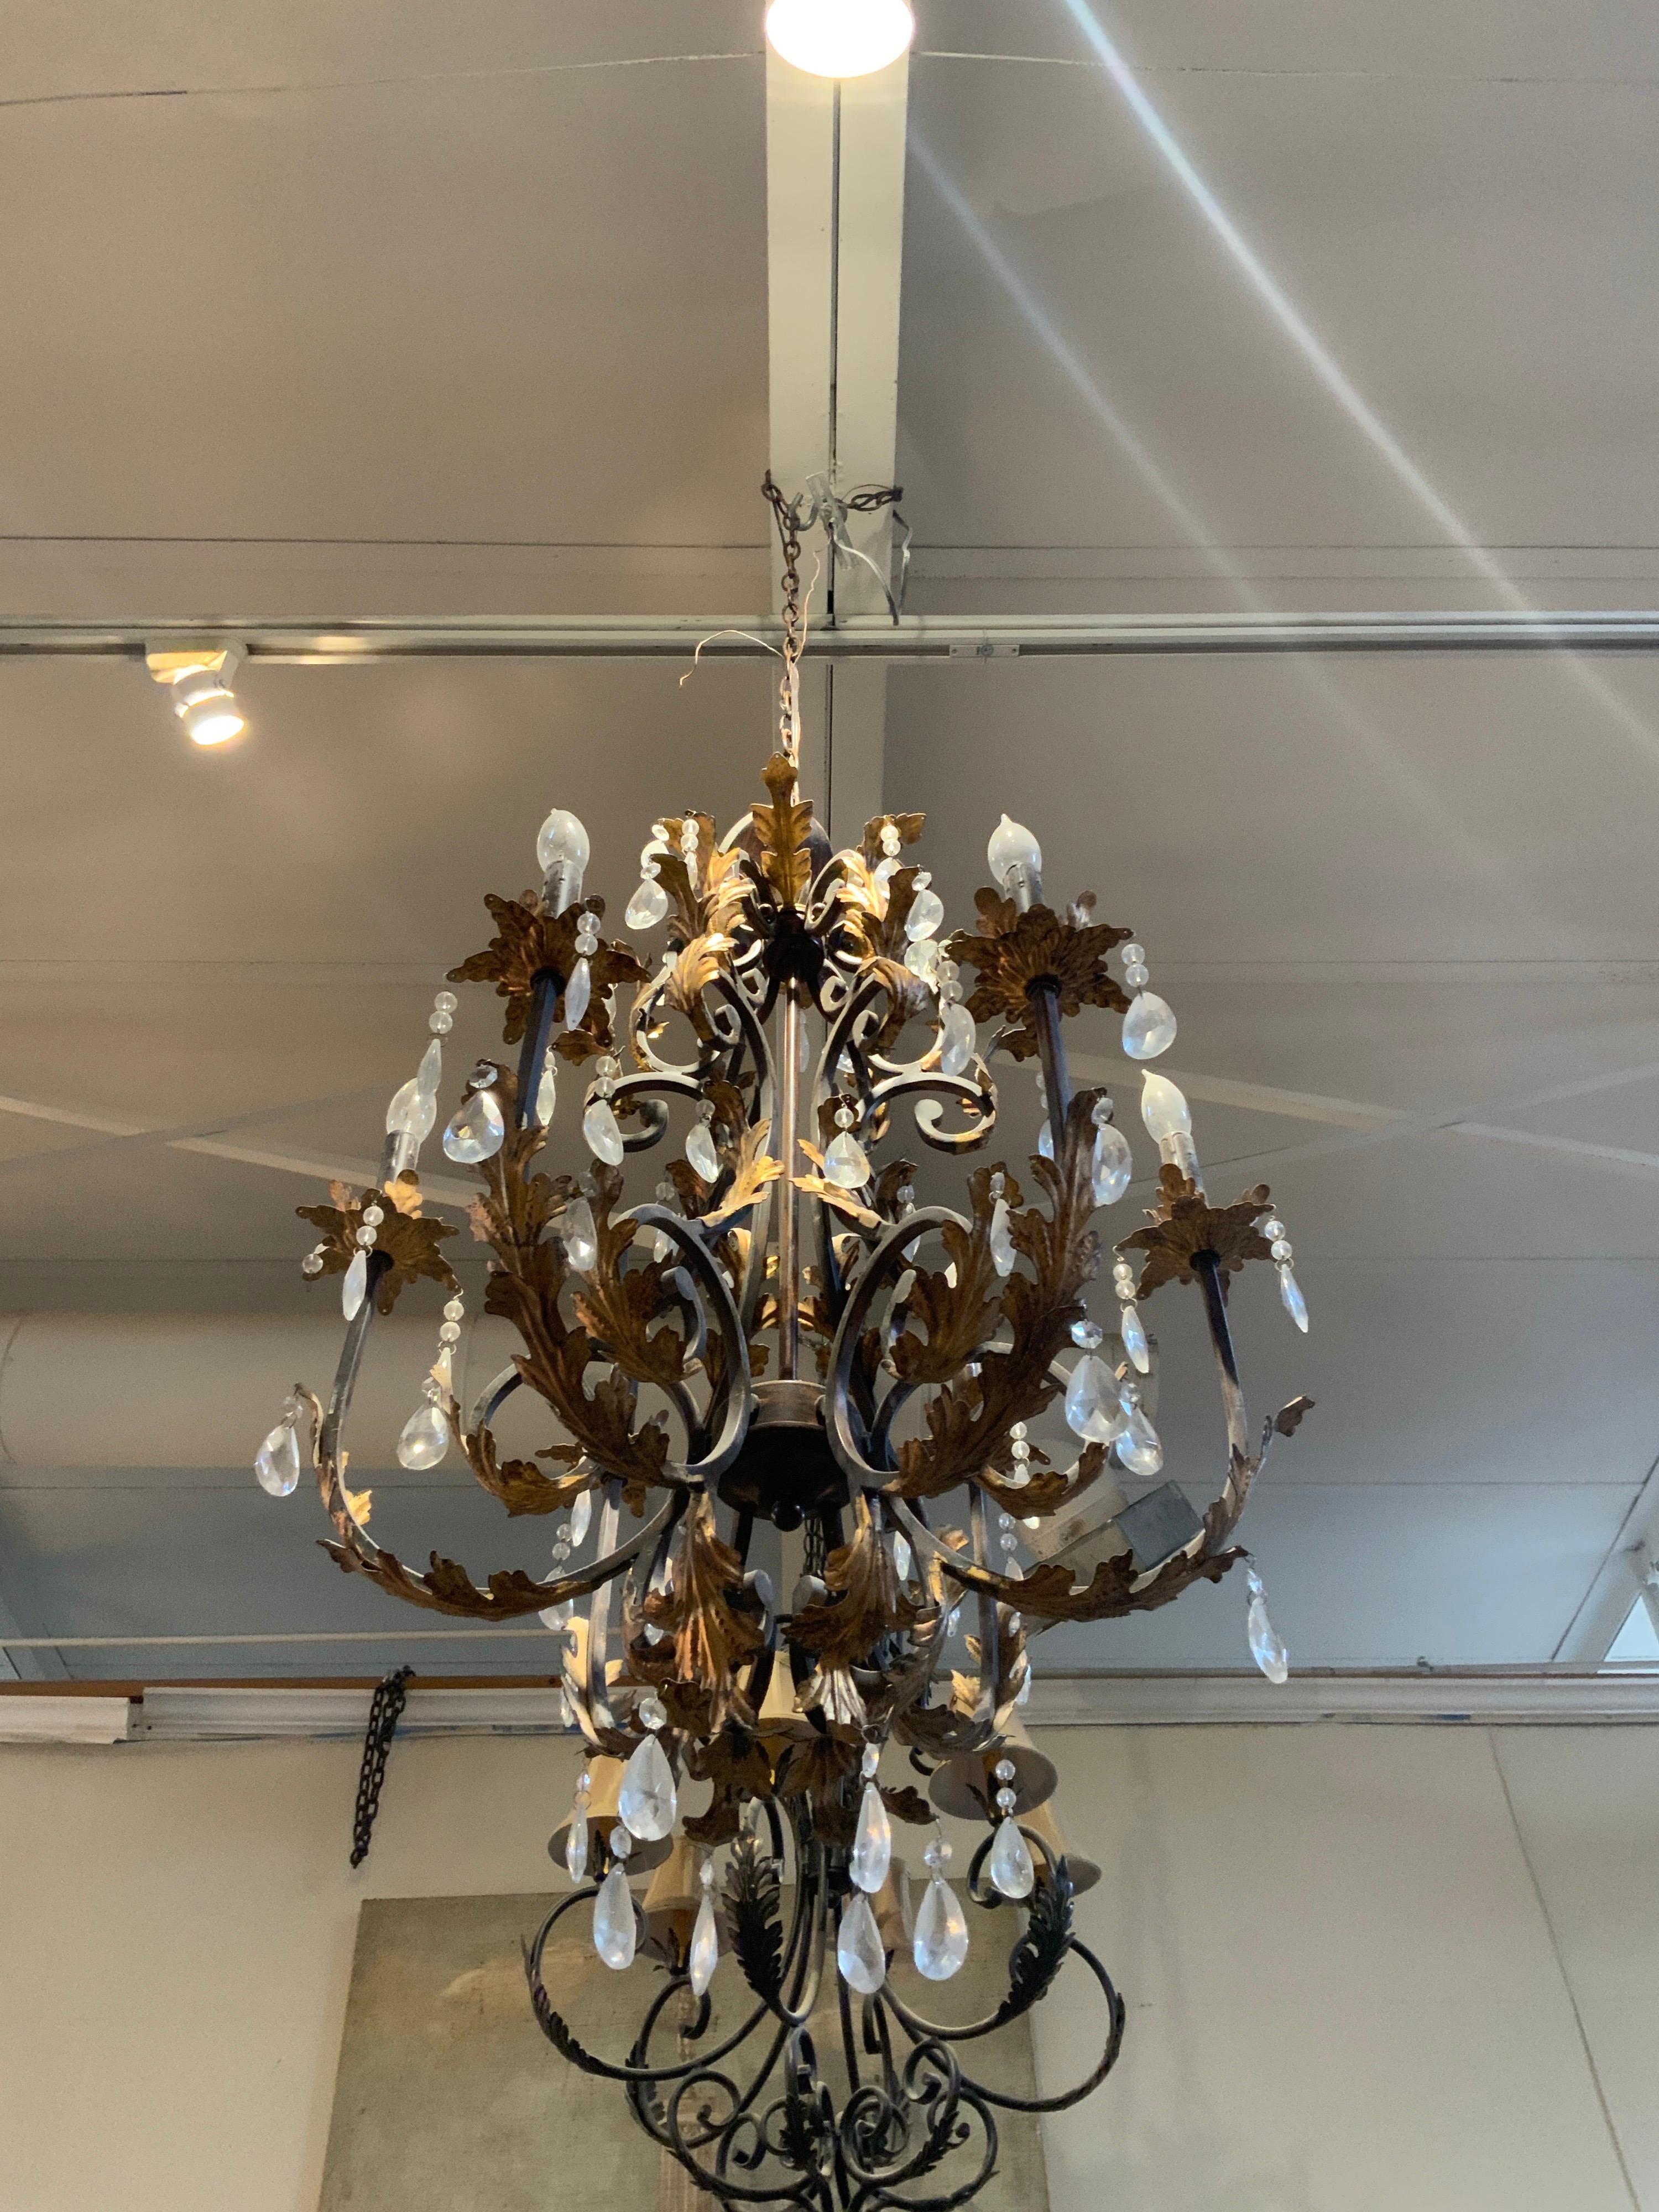 This iron chandelier originates from France, circa 1950.